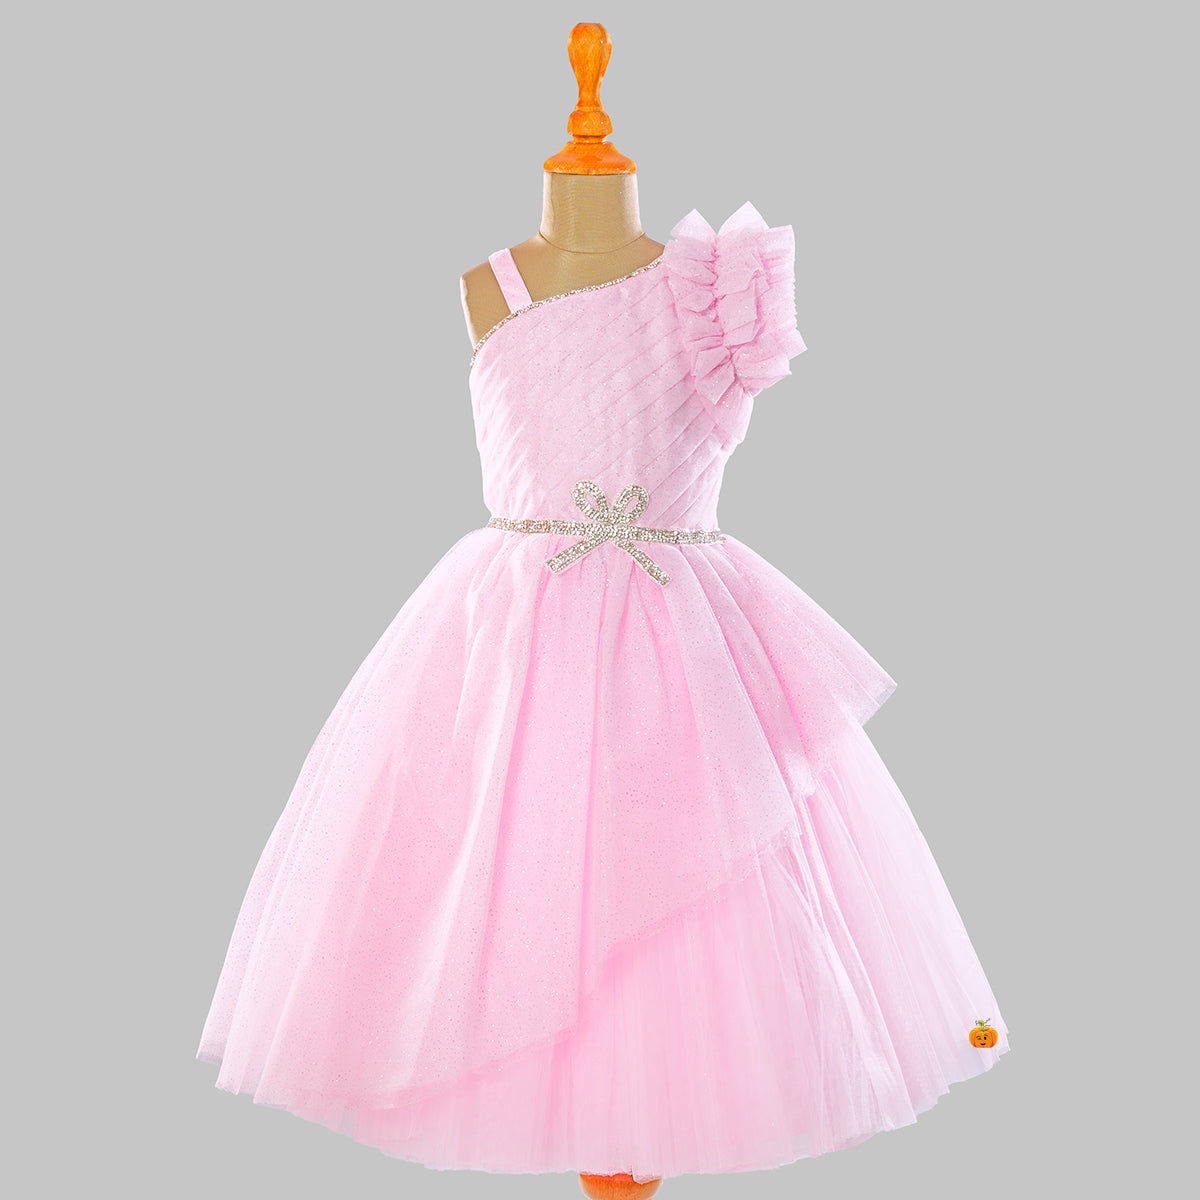 Gold Lace Beaded Flower Girl Satin Ballgown Dress With Satin Long Sleeves  Perfect For Lilttle Kids Birthday, Pageant, And Wedding 2021 Collection  ZJ674194Q From Yier63, $87.84 | DHgate.Com